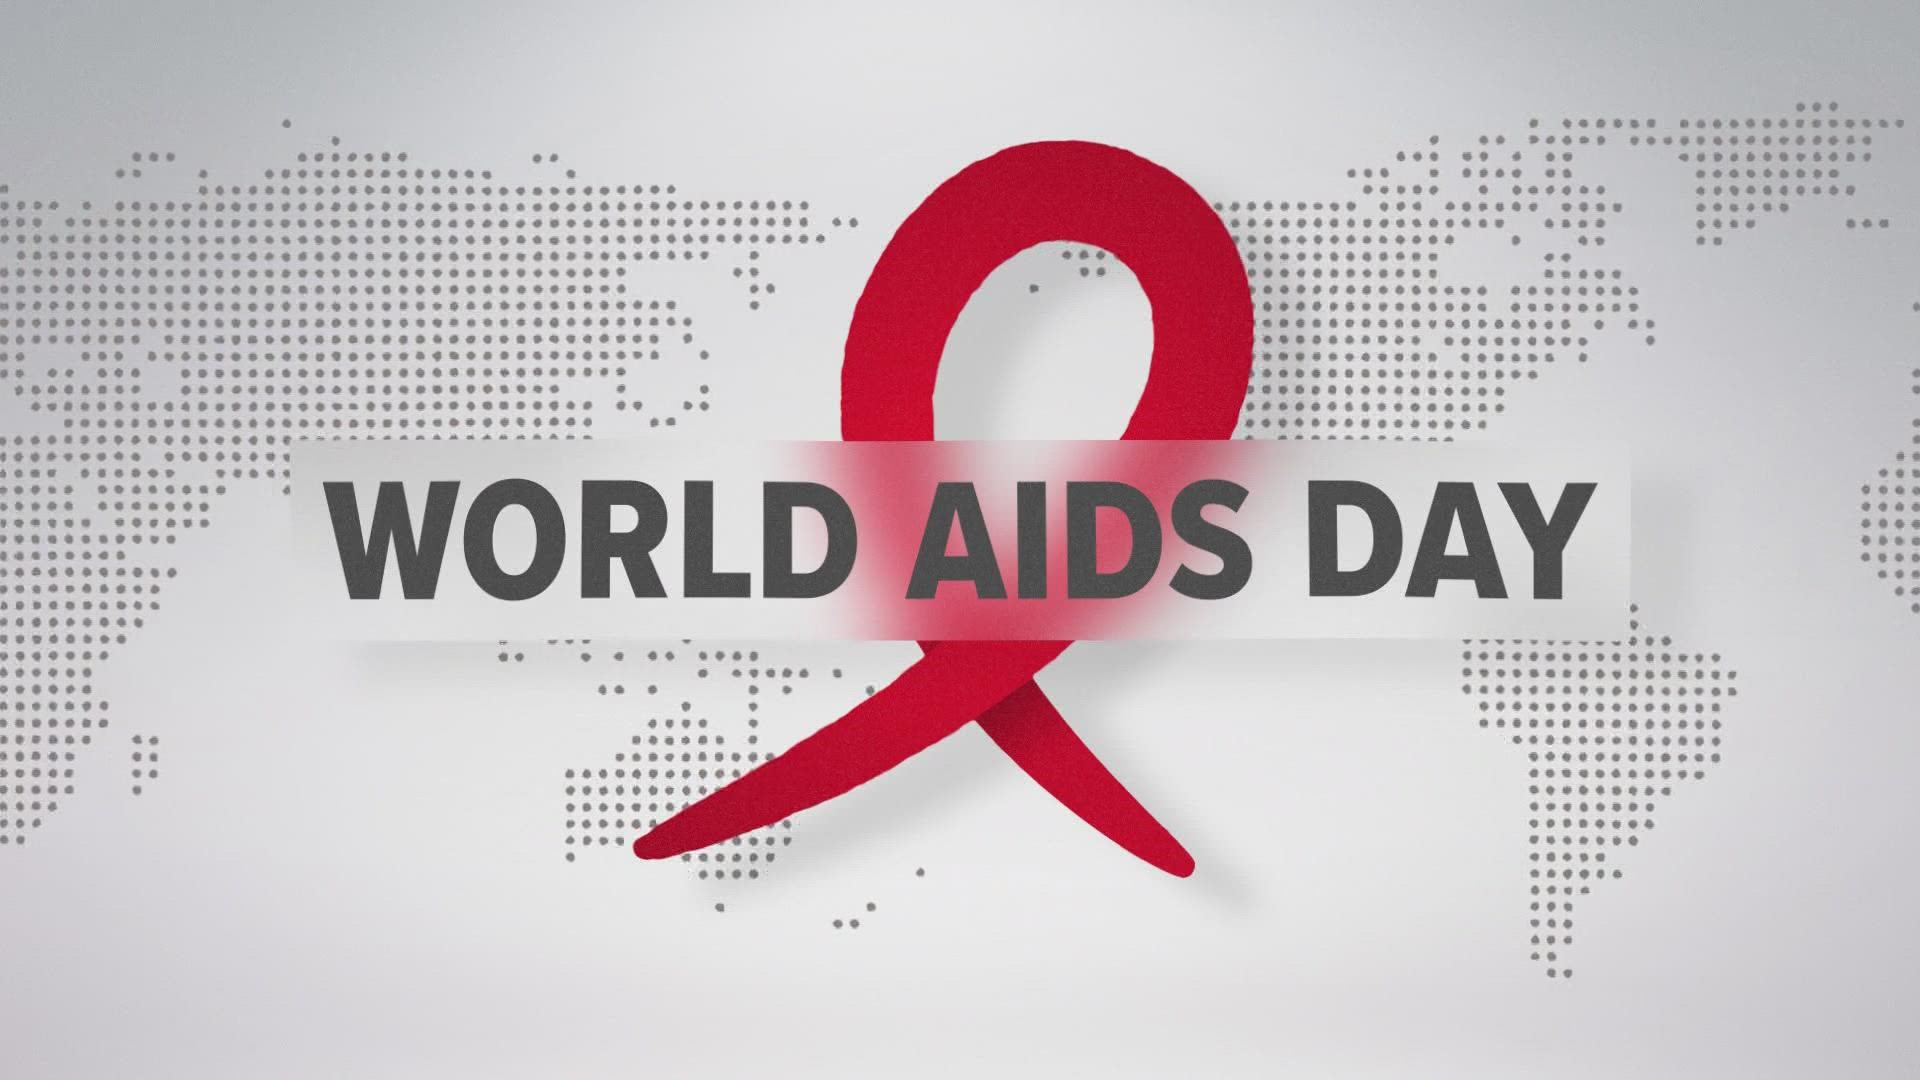 Dr. Stacy Greene, DePaul Infectious Disease Director discusses advancements in HIV/Aids care for World Aids Day.